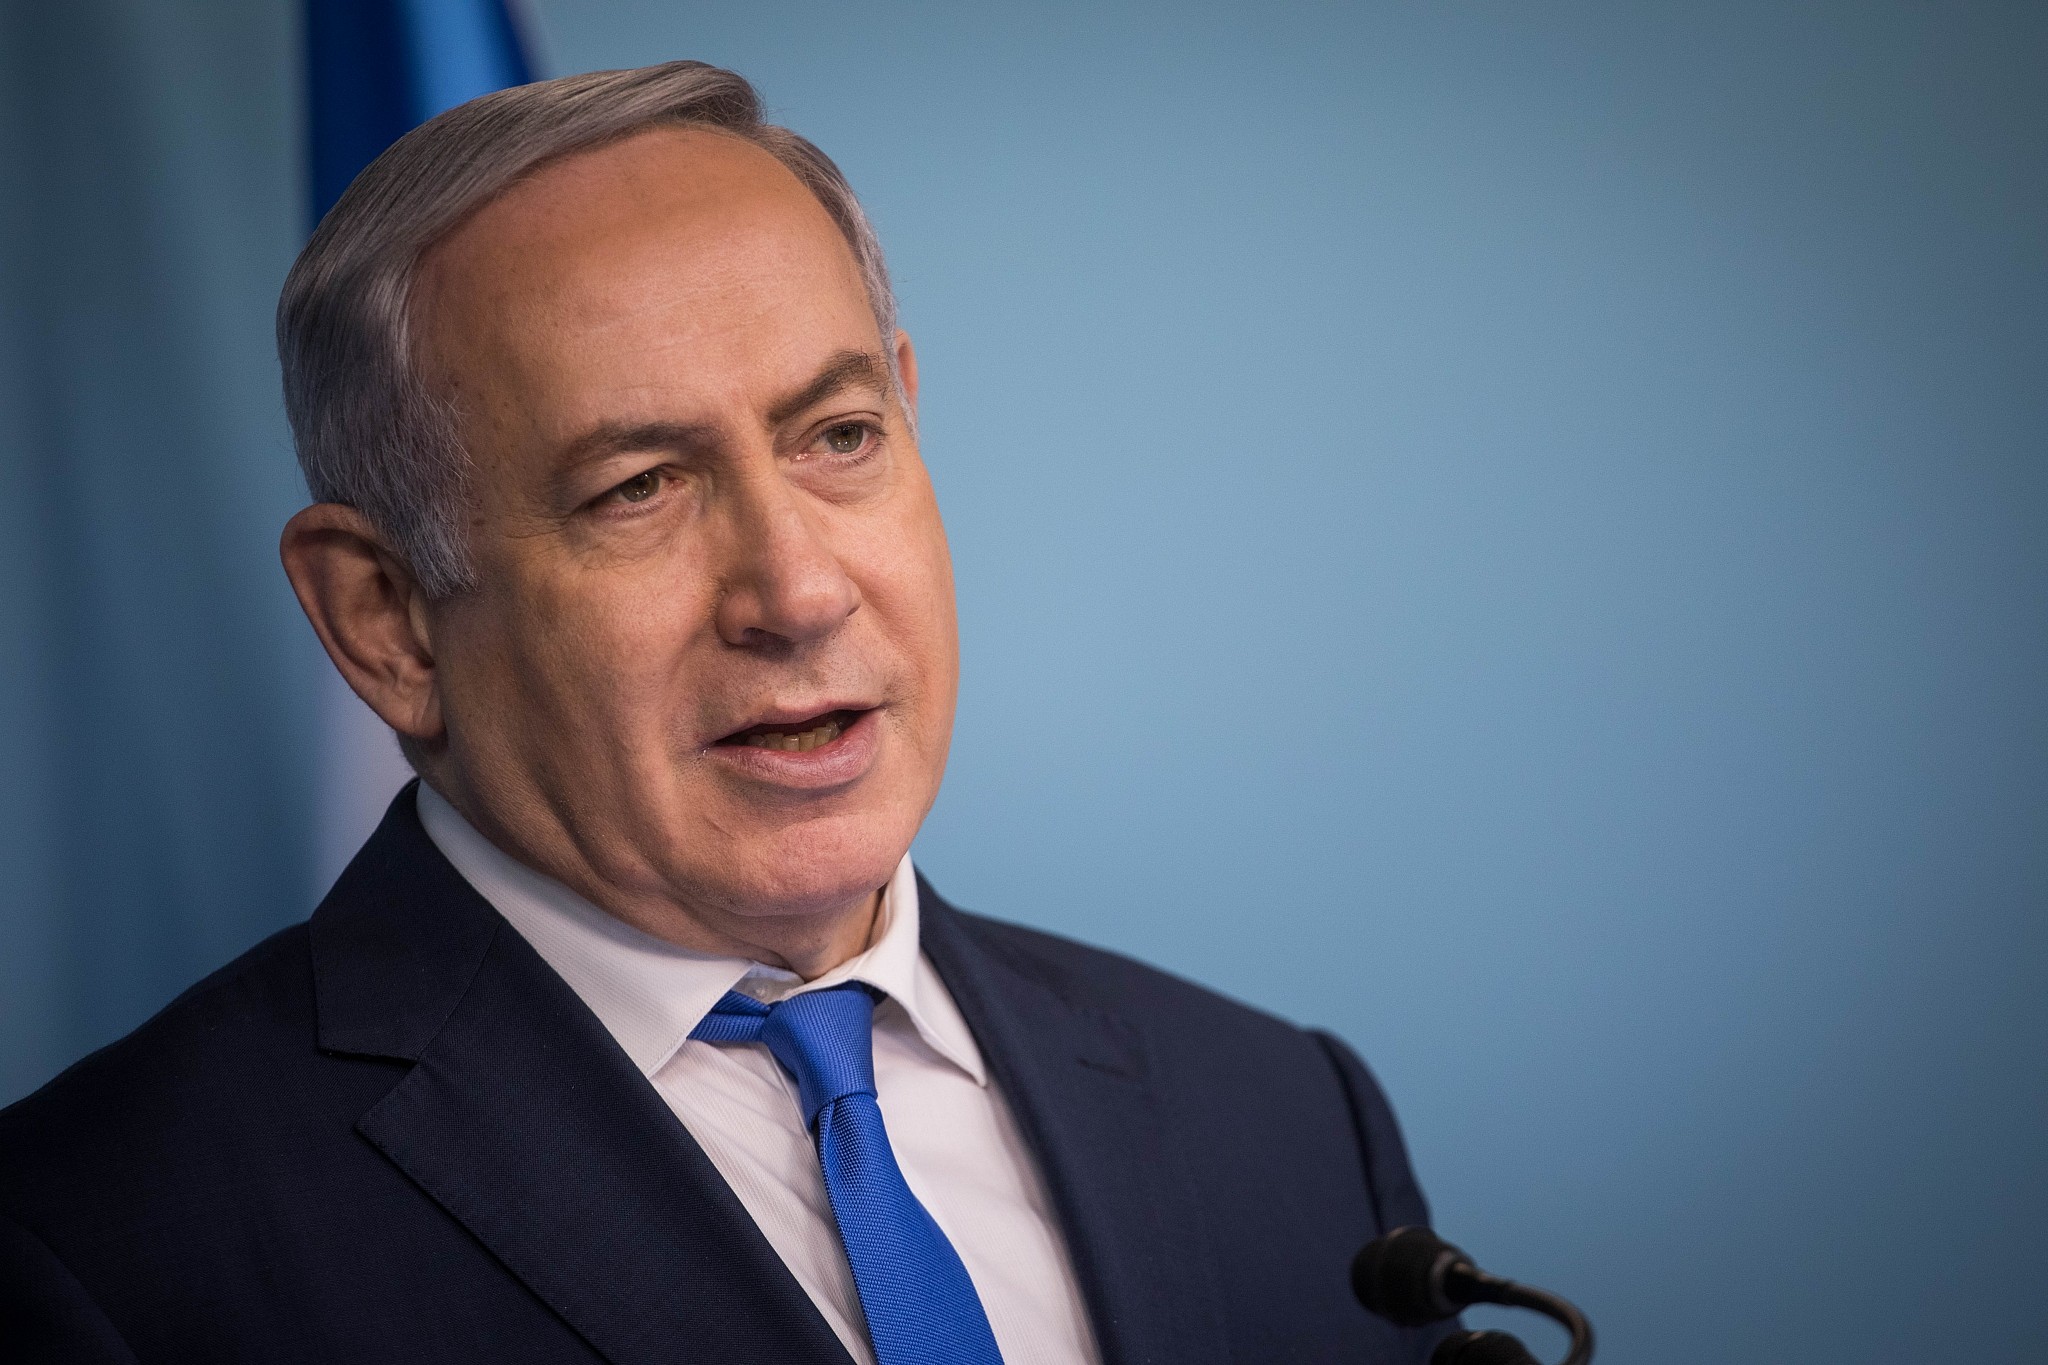 Netanyahu: Relations with Jordan back on track, new envoy to be named